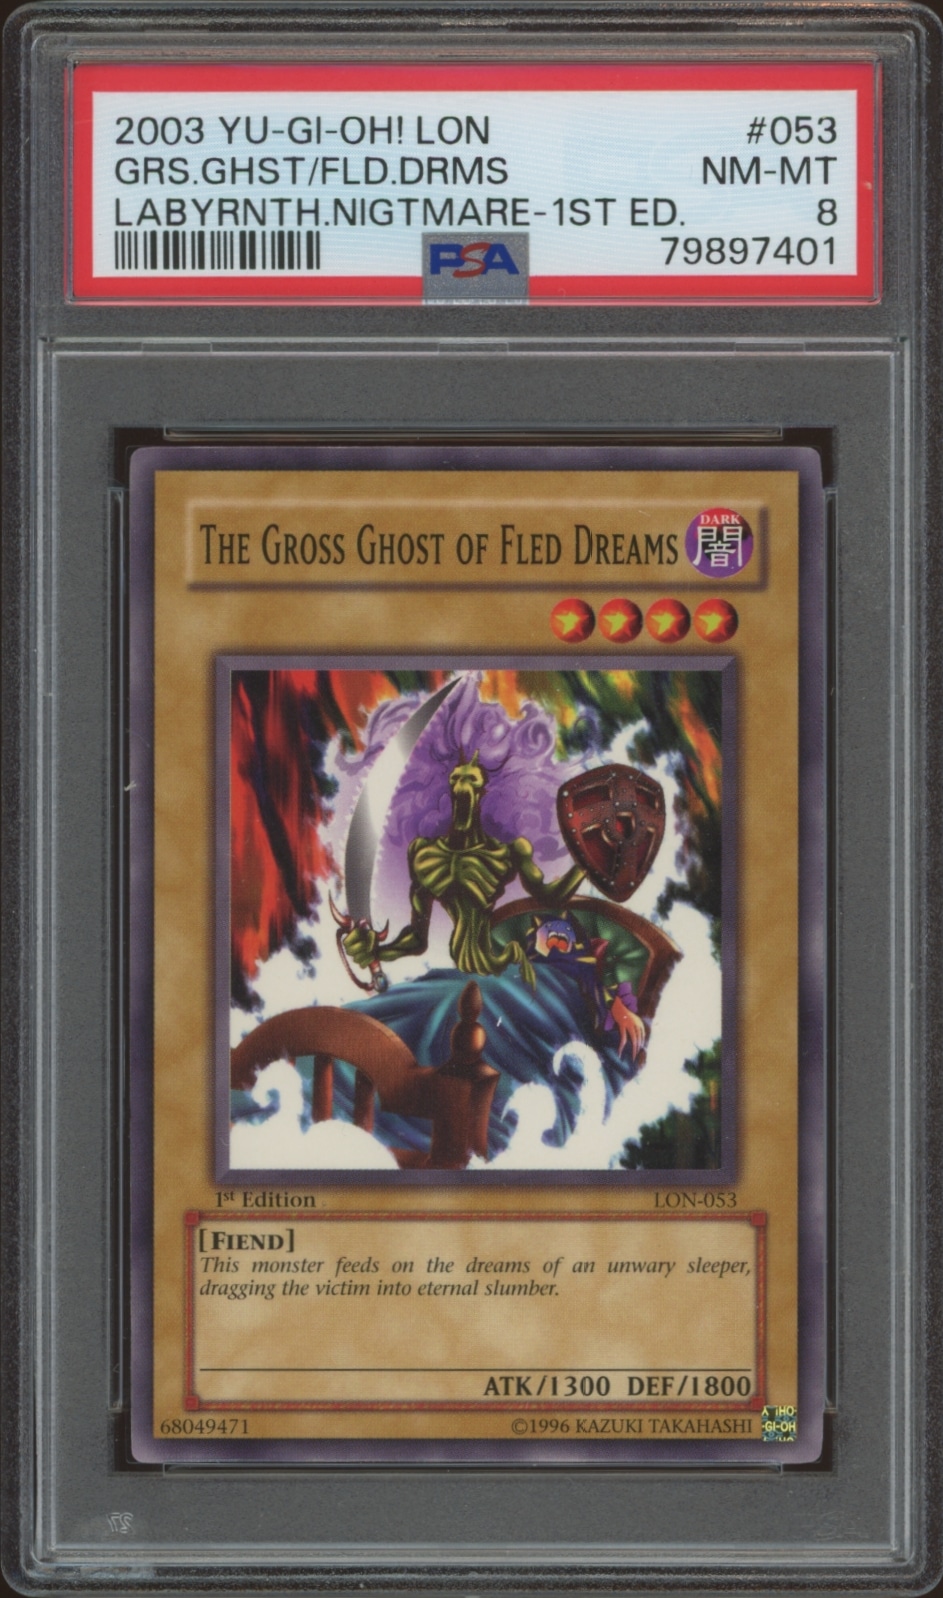 Graded 1st Edition Yu-Gi-Oh! Gross Ghost of Fled Dreams card in protective PSA case.